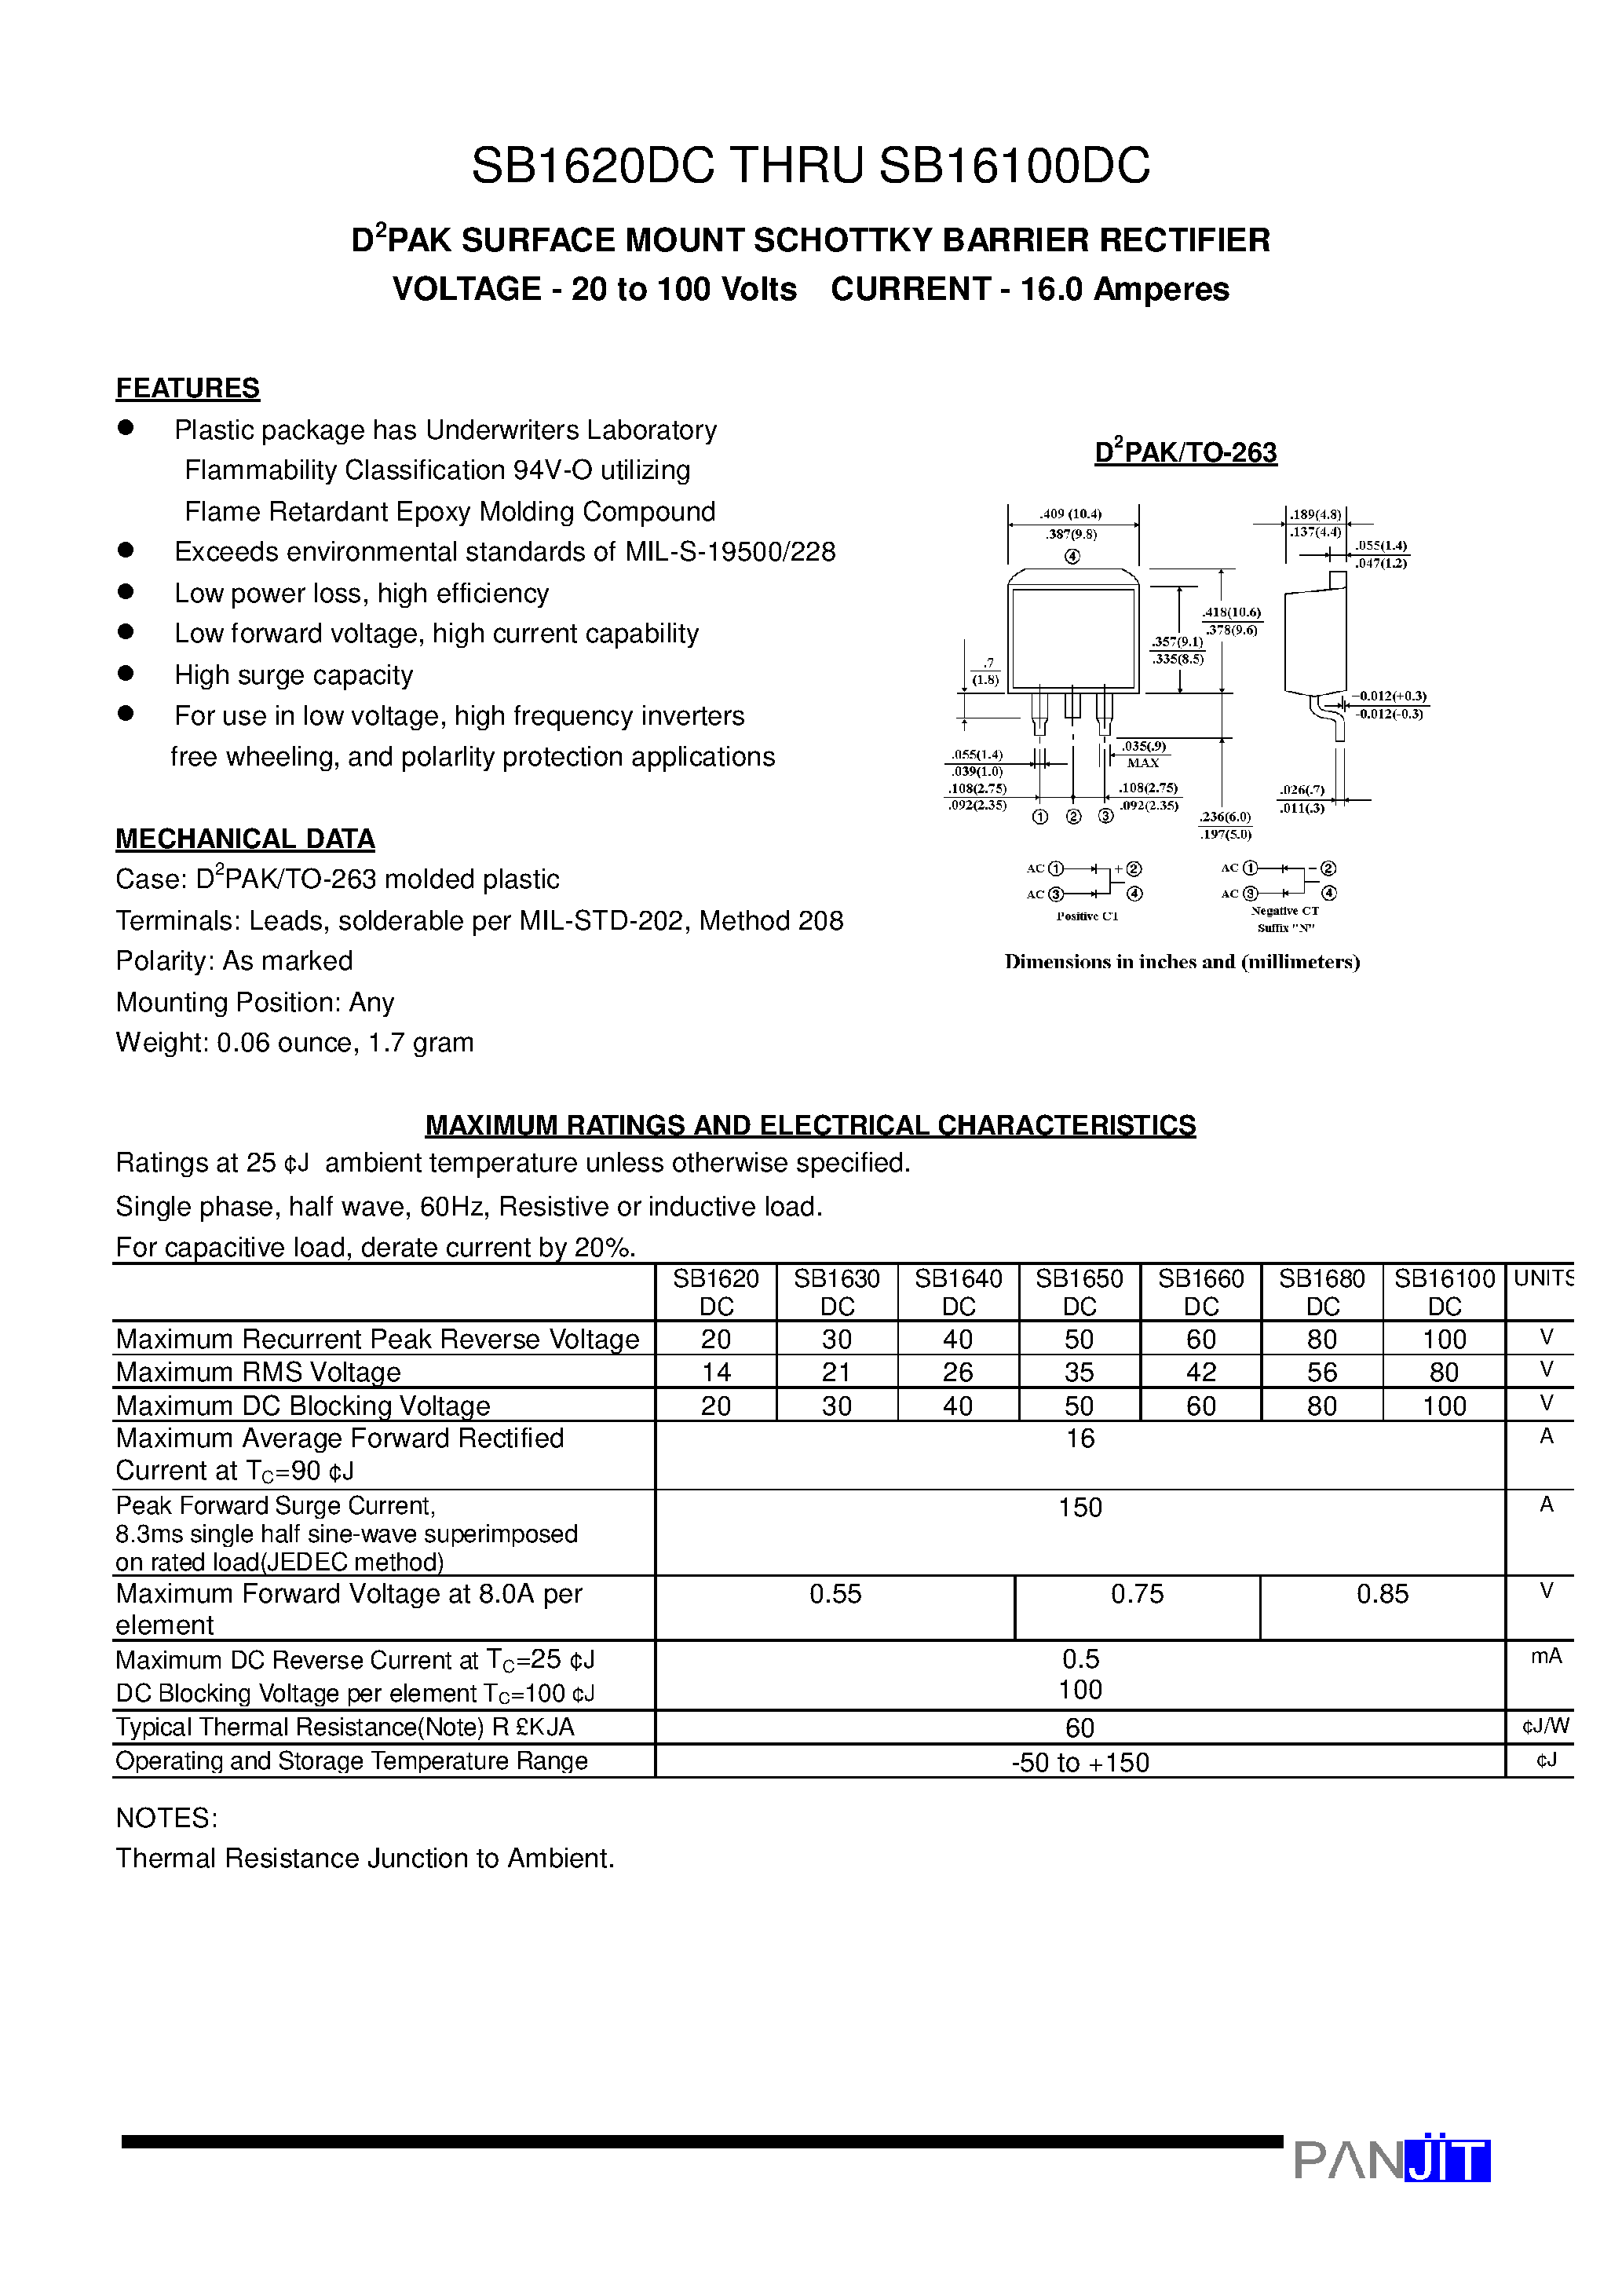 Datasheet SB1650DC - D2PAK SURFACE MOUNT SCHOTTKY BARRIER RECTIFIER(VOLTAGE - 20 to 100 Volts CURRENT - 16.0 Amperes) page 1